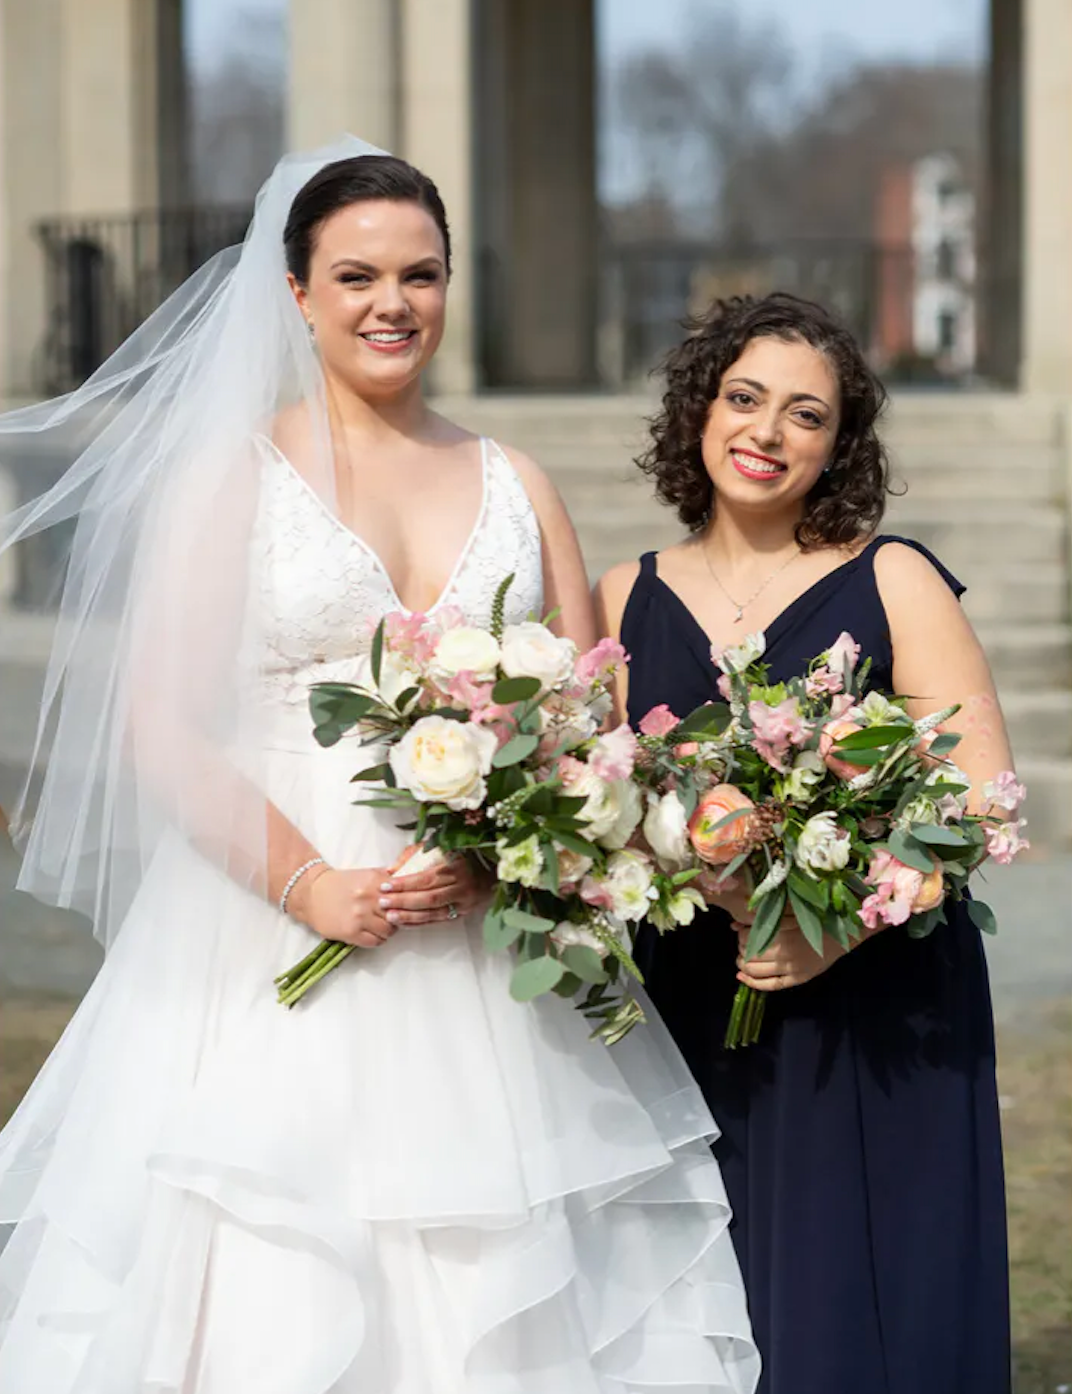 A bride and a bridesmaid (me!). I am wearing a navy dress and we are both holding bouquets